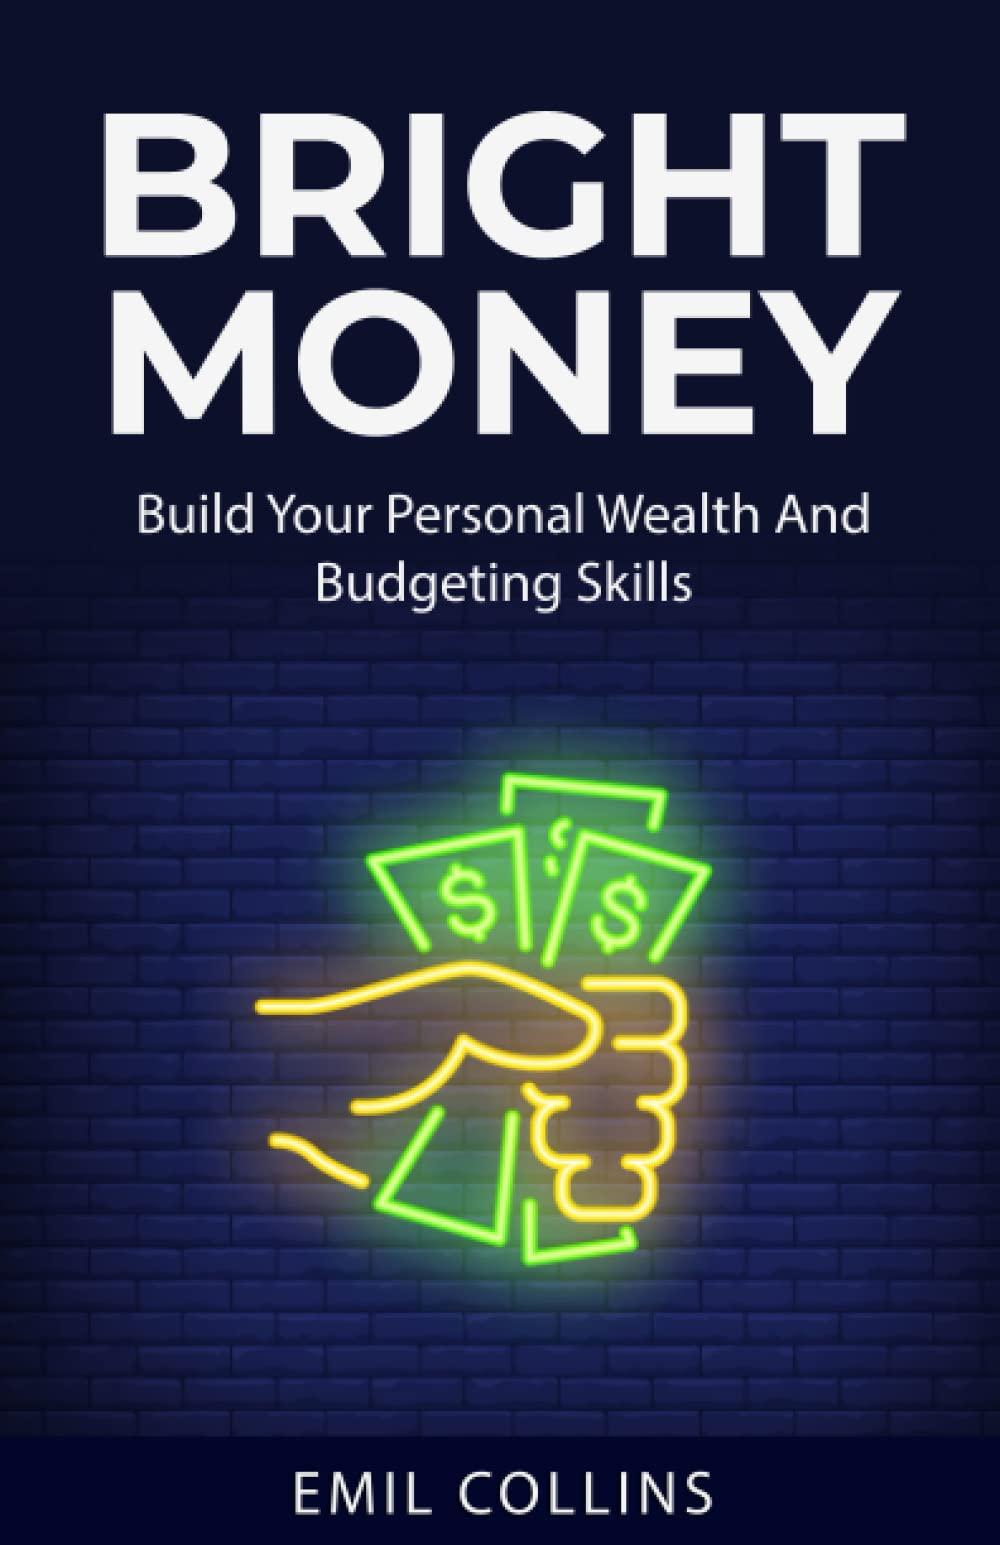 bright money build your personal wealth and budgeting skills a simple path to manage your budget controlling